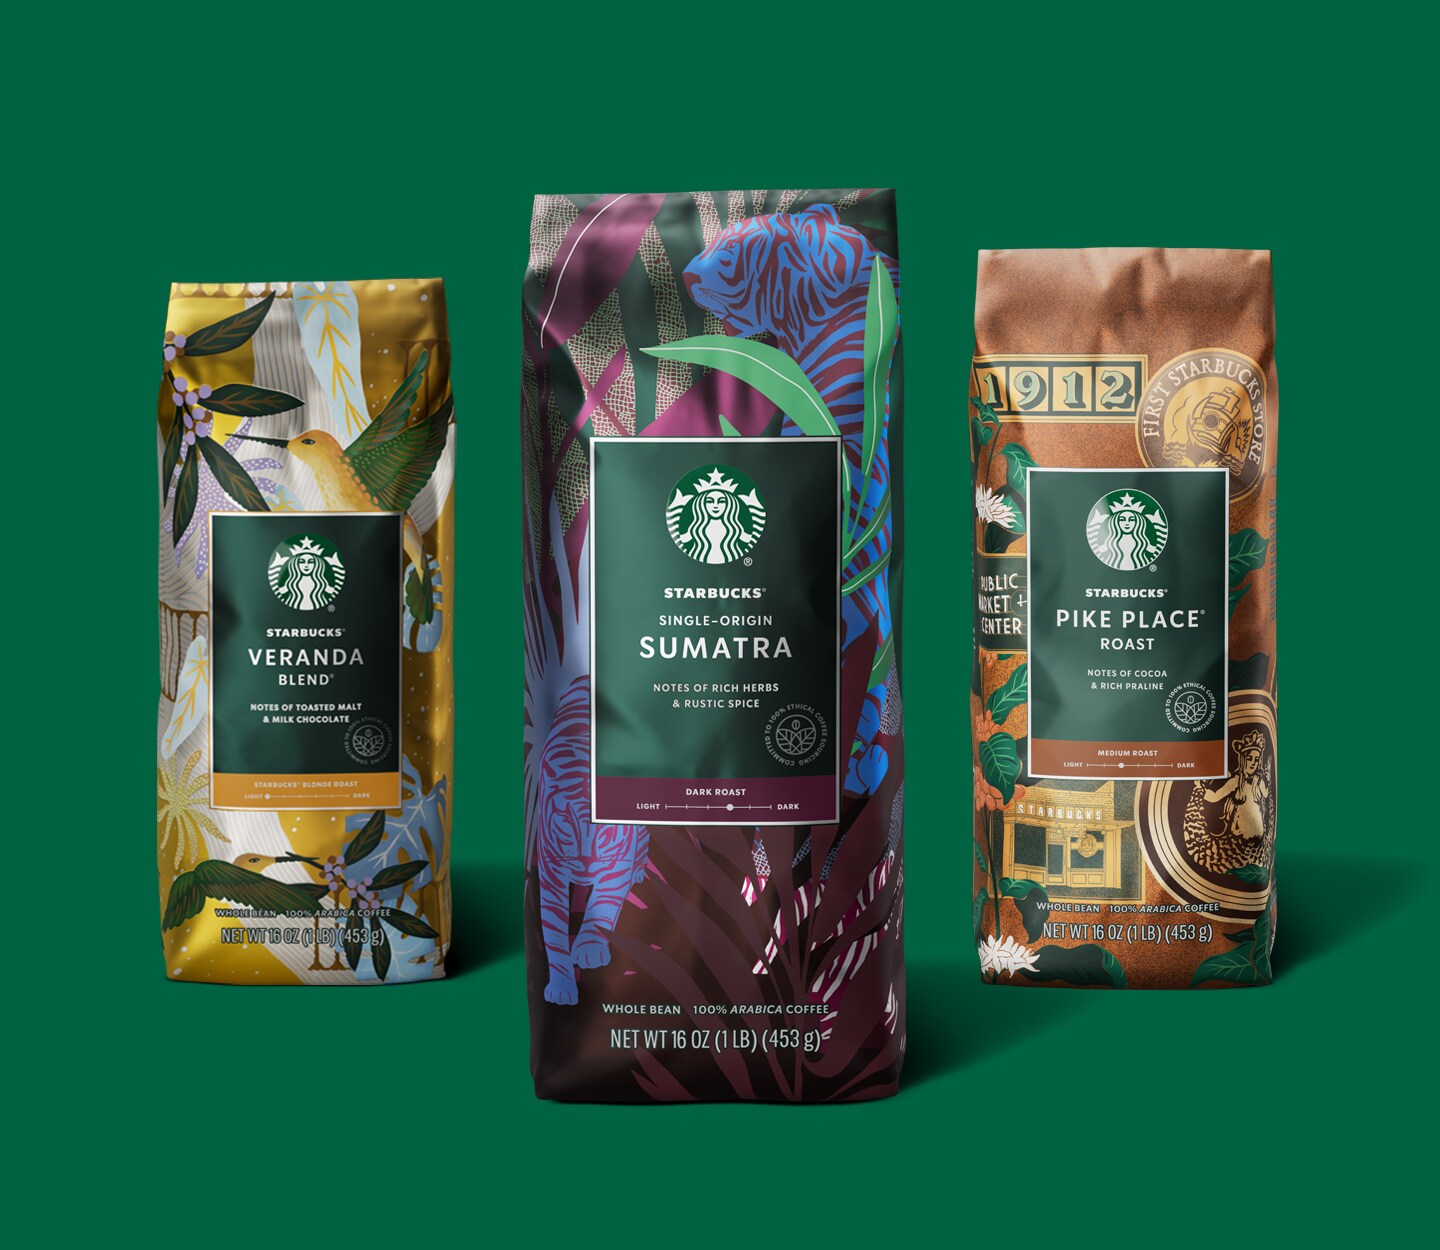 Image of three new coffee bags for Veranda Blend, Sumatra and Pike Place Roast